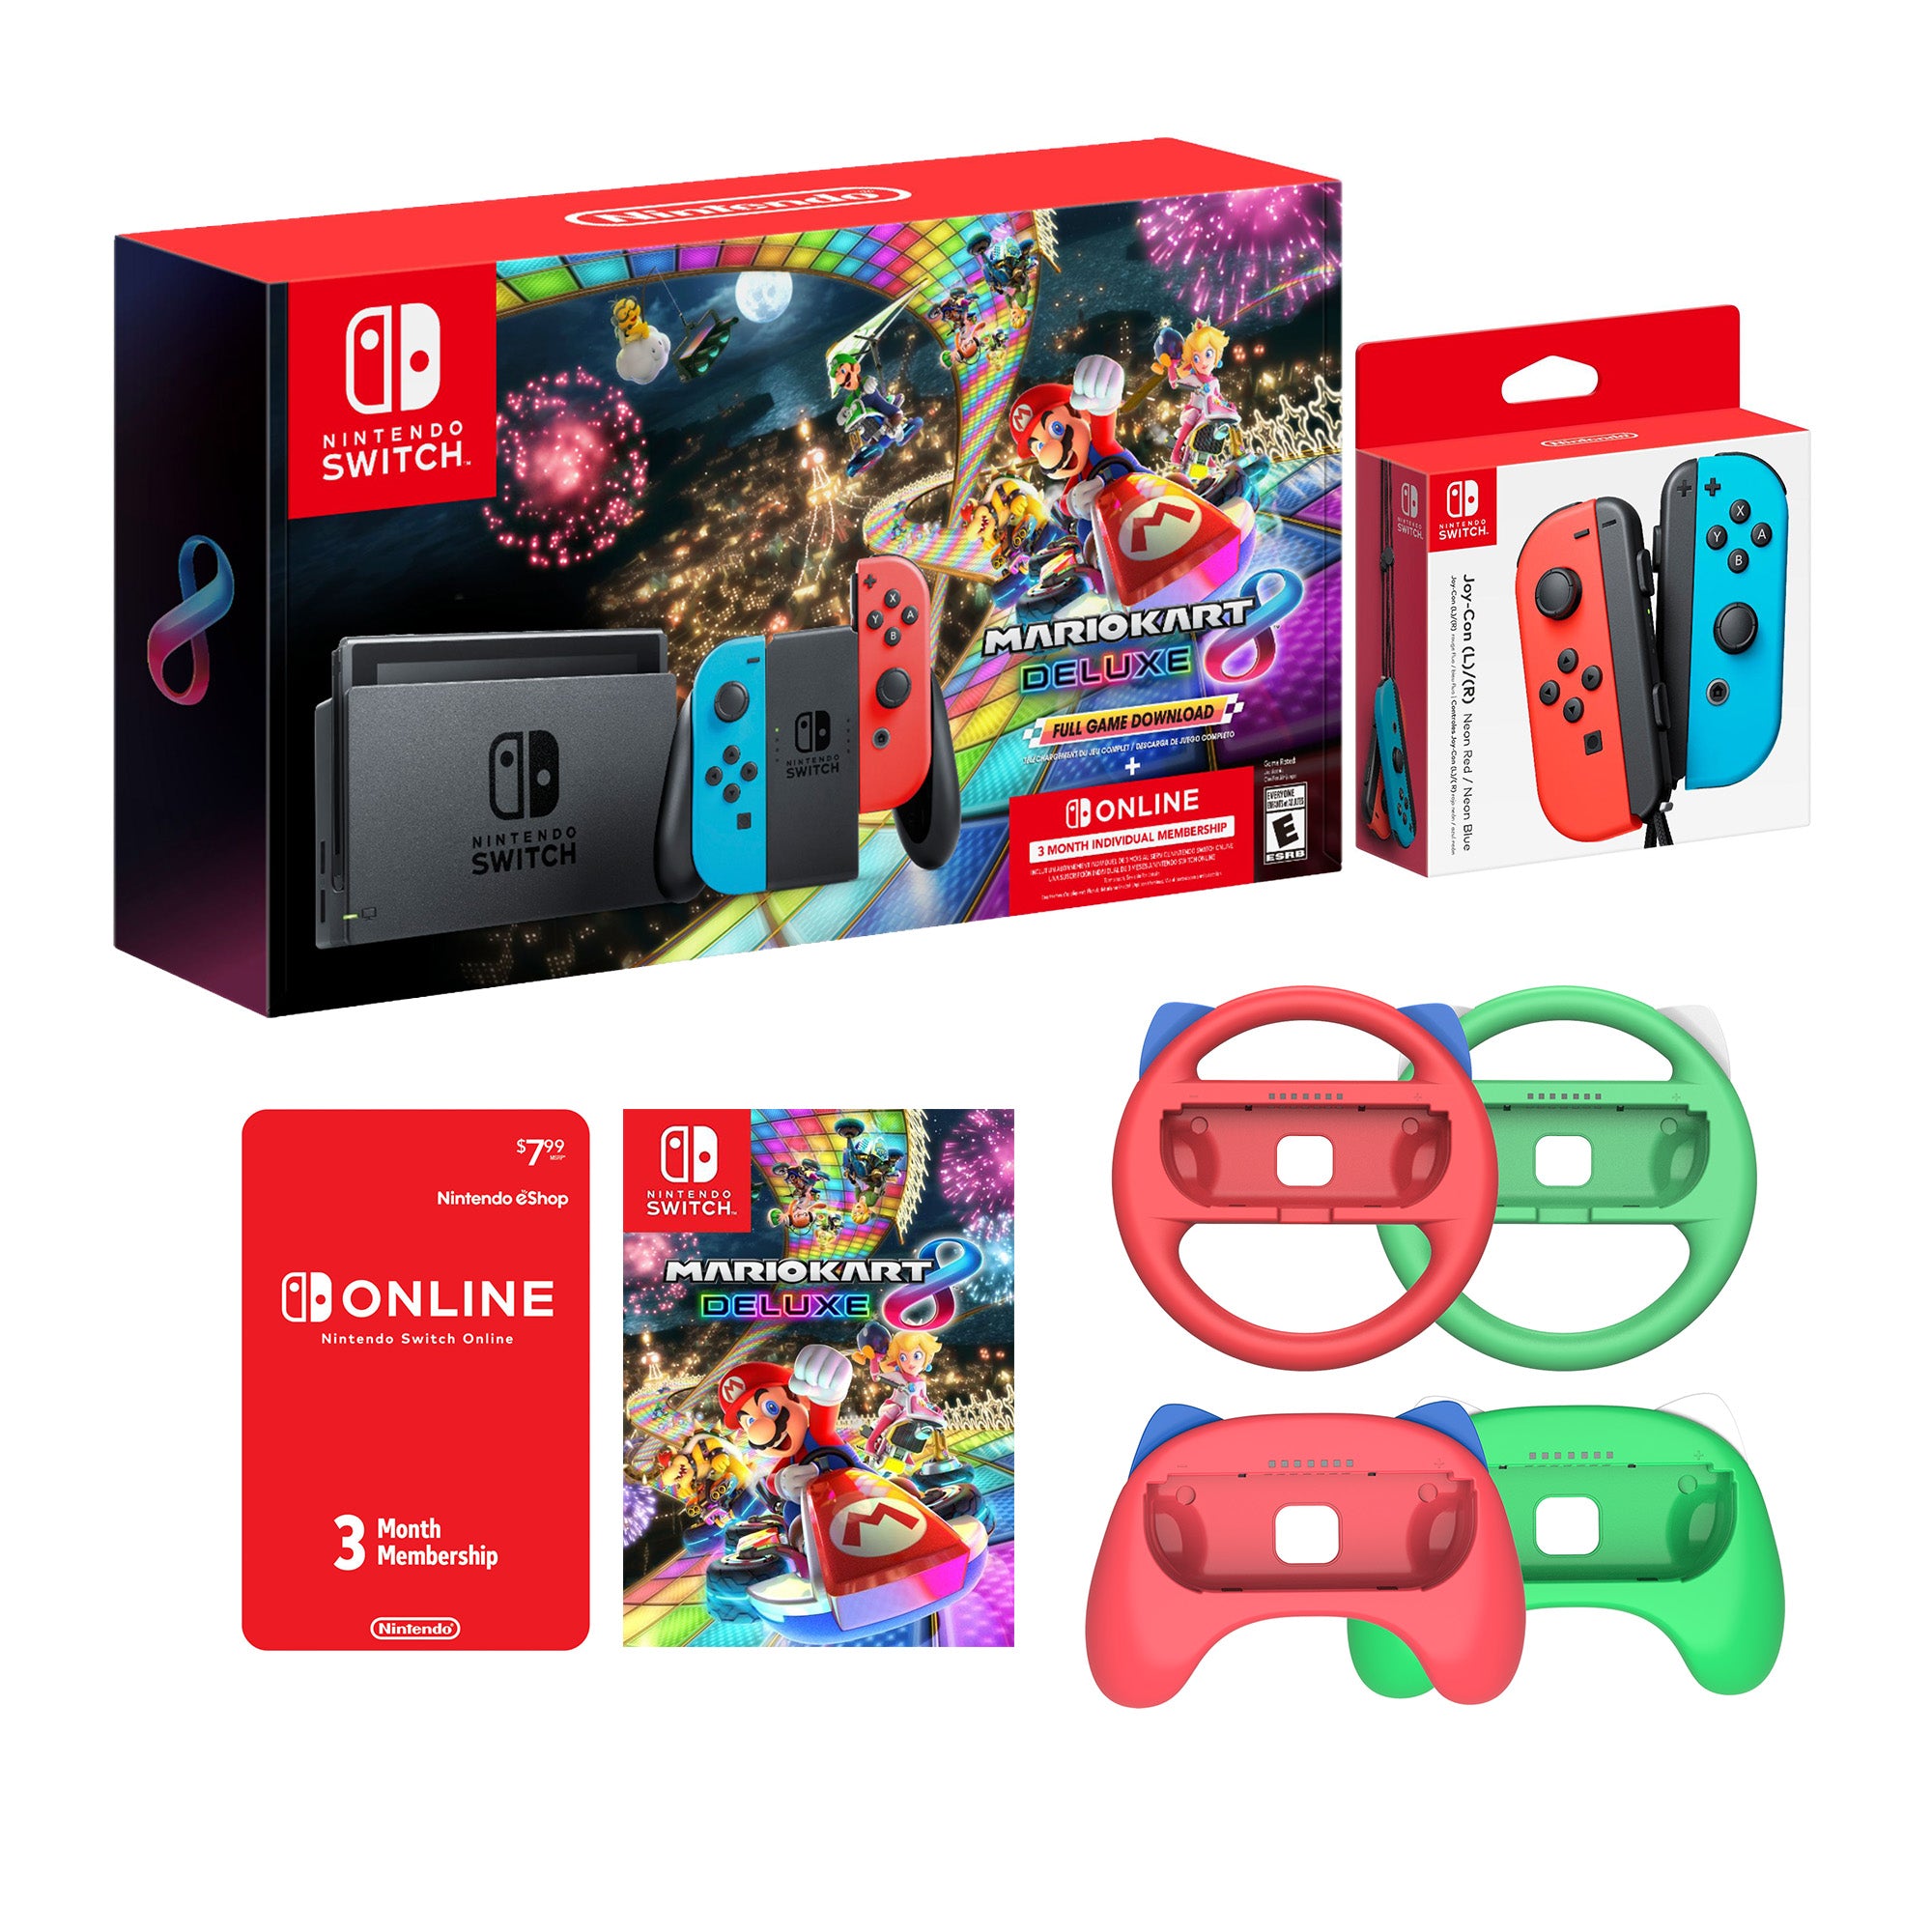 Nintendo Switch Mario Kart 8 Neon Multiplayer Racing Bundle: Red Blue JoyCon Console, Mario Kart 8 Deluxe & Online Membership, Mytrix Wheels & Grips 4 Pcs, Additional Red/Blue JoyCons